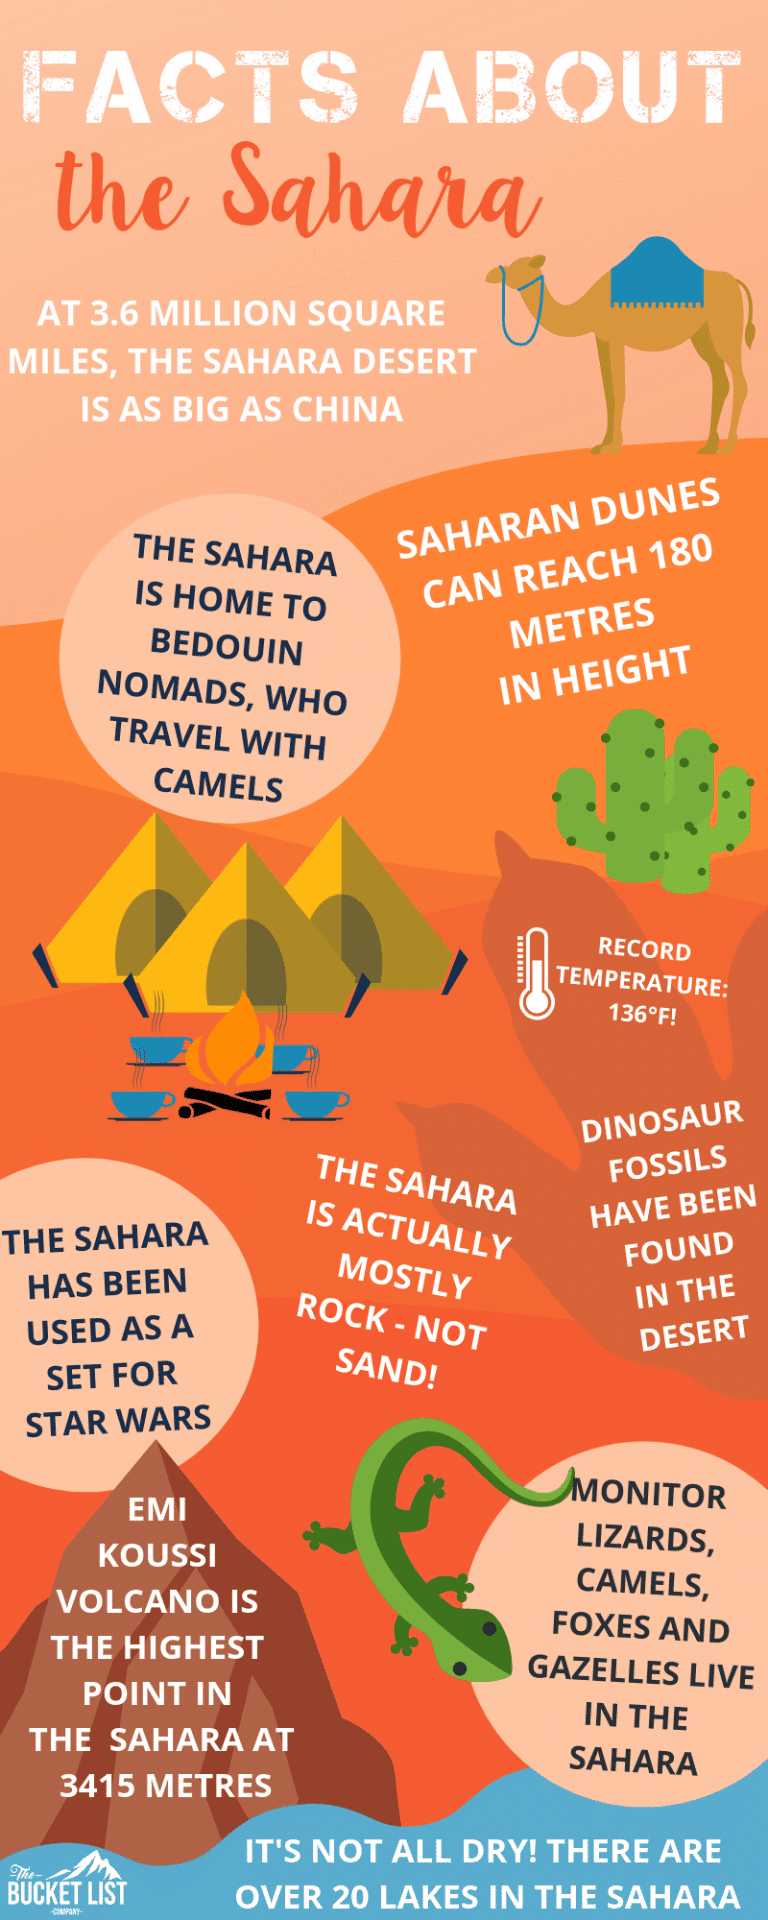 Facts about the Sahara Desert